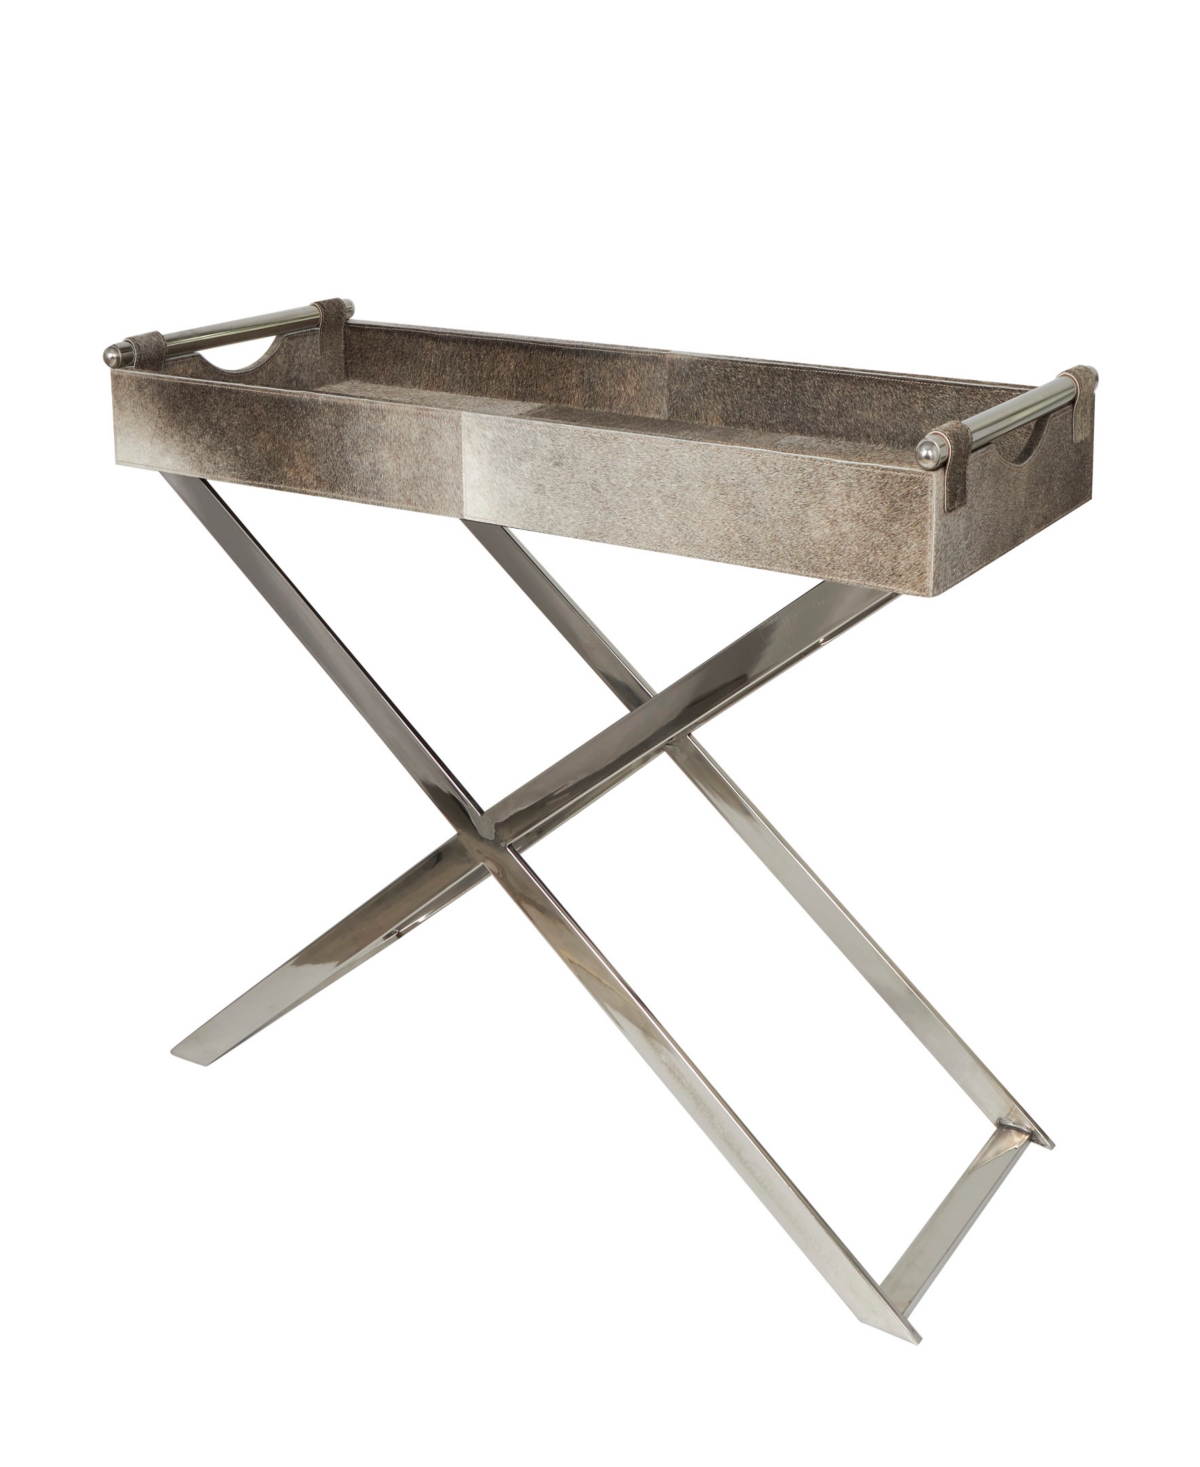 Rosemary Lane 45" X 18" X 30" Leather Tray Diagonal Silver-tone Legs And Handles Accent Table In Gray